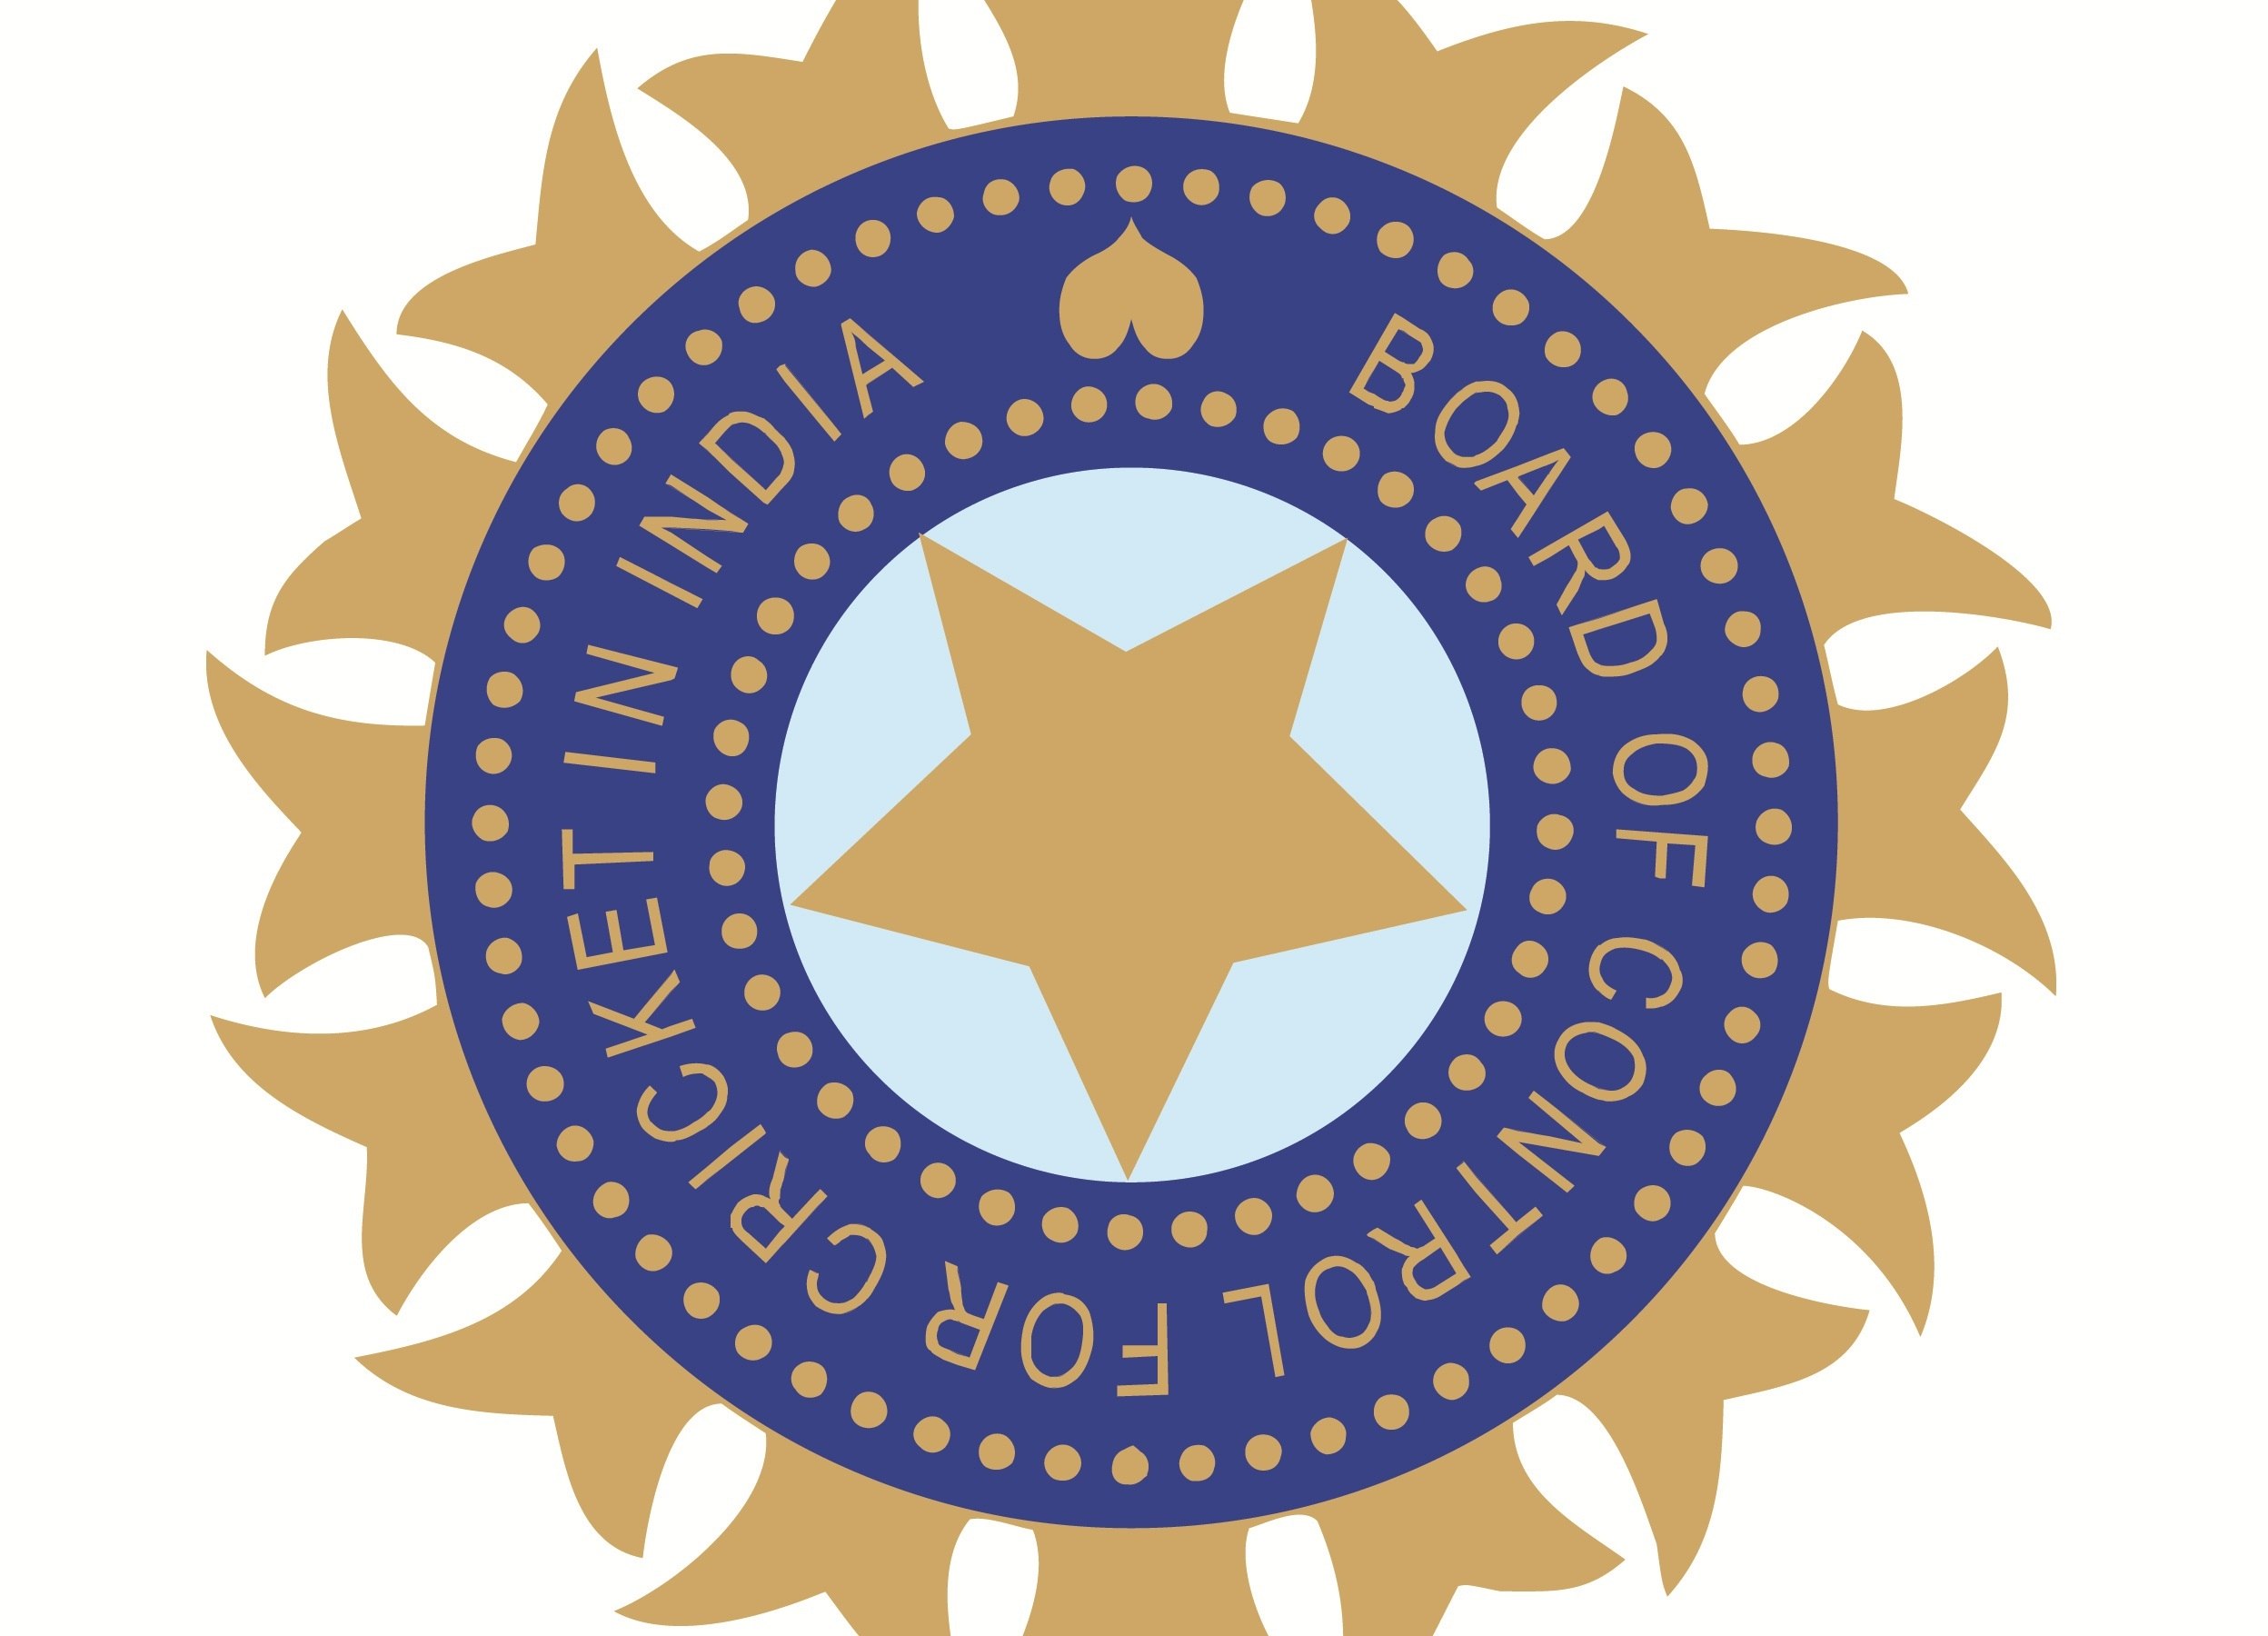 BCCI asks Penny, Dawes to report at NCA: Reports